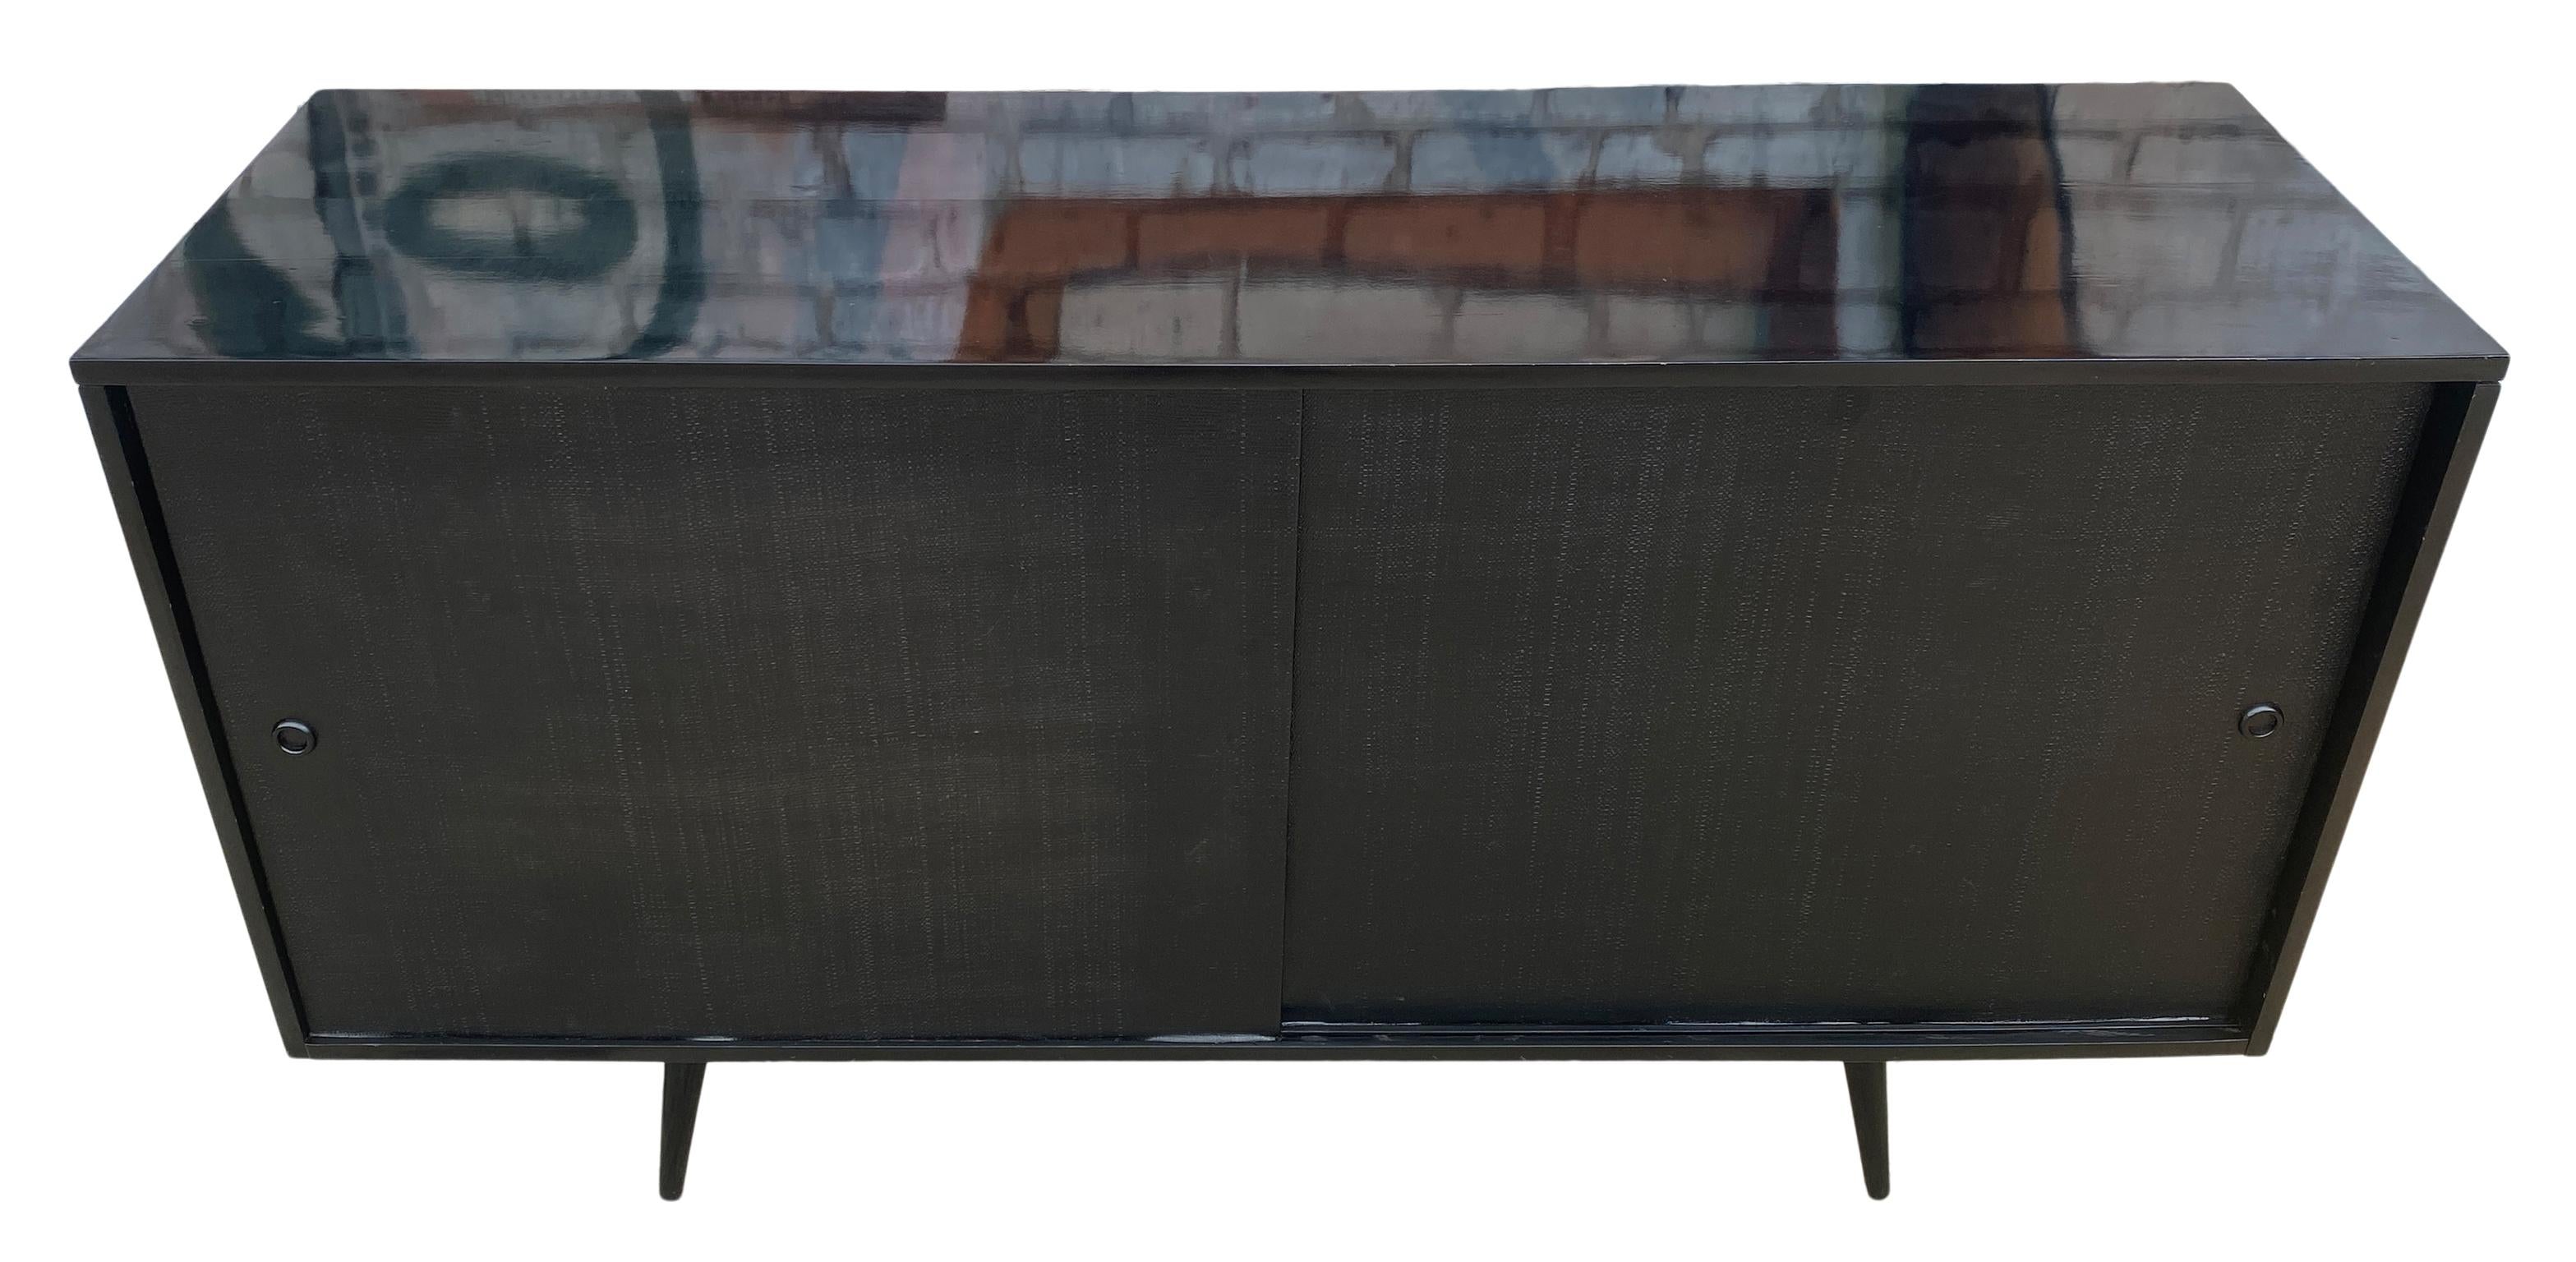 Beautiful midcentury tall credenza by Paul McCobb circa 1950 Planner Group #1514 has 1 adjustable shelves with pins with 1 drawer on the left side and 3 drawers on the right side. Solid maple construction with a high gloss black lacquer finish. All